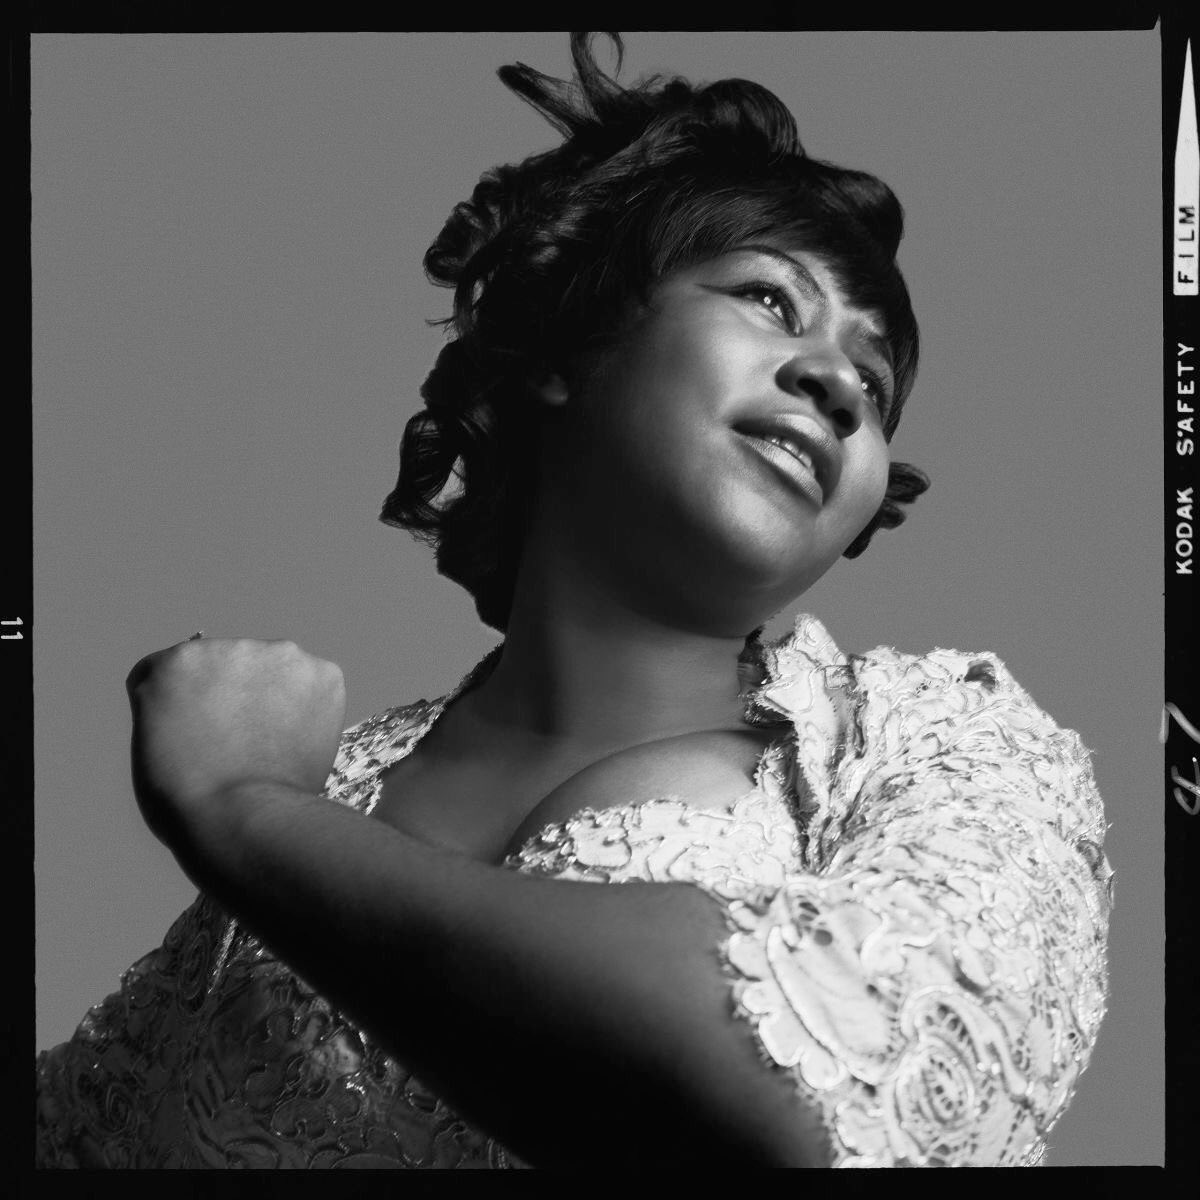 Playing your many, many anthems on repeat all day. ???? Rest in peace #ArethaFranklin #Queen #RESPECT https://t.co/ZXdRM7lUvK